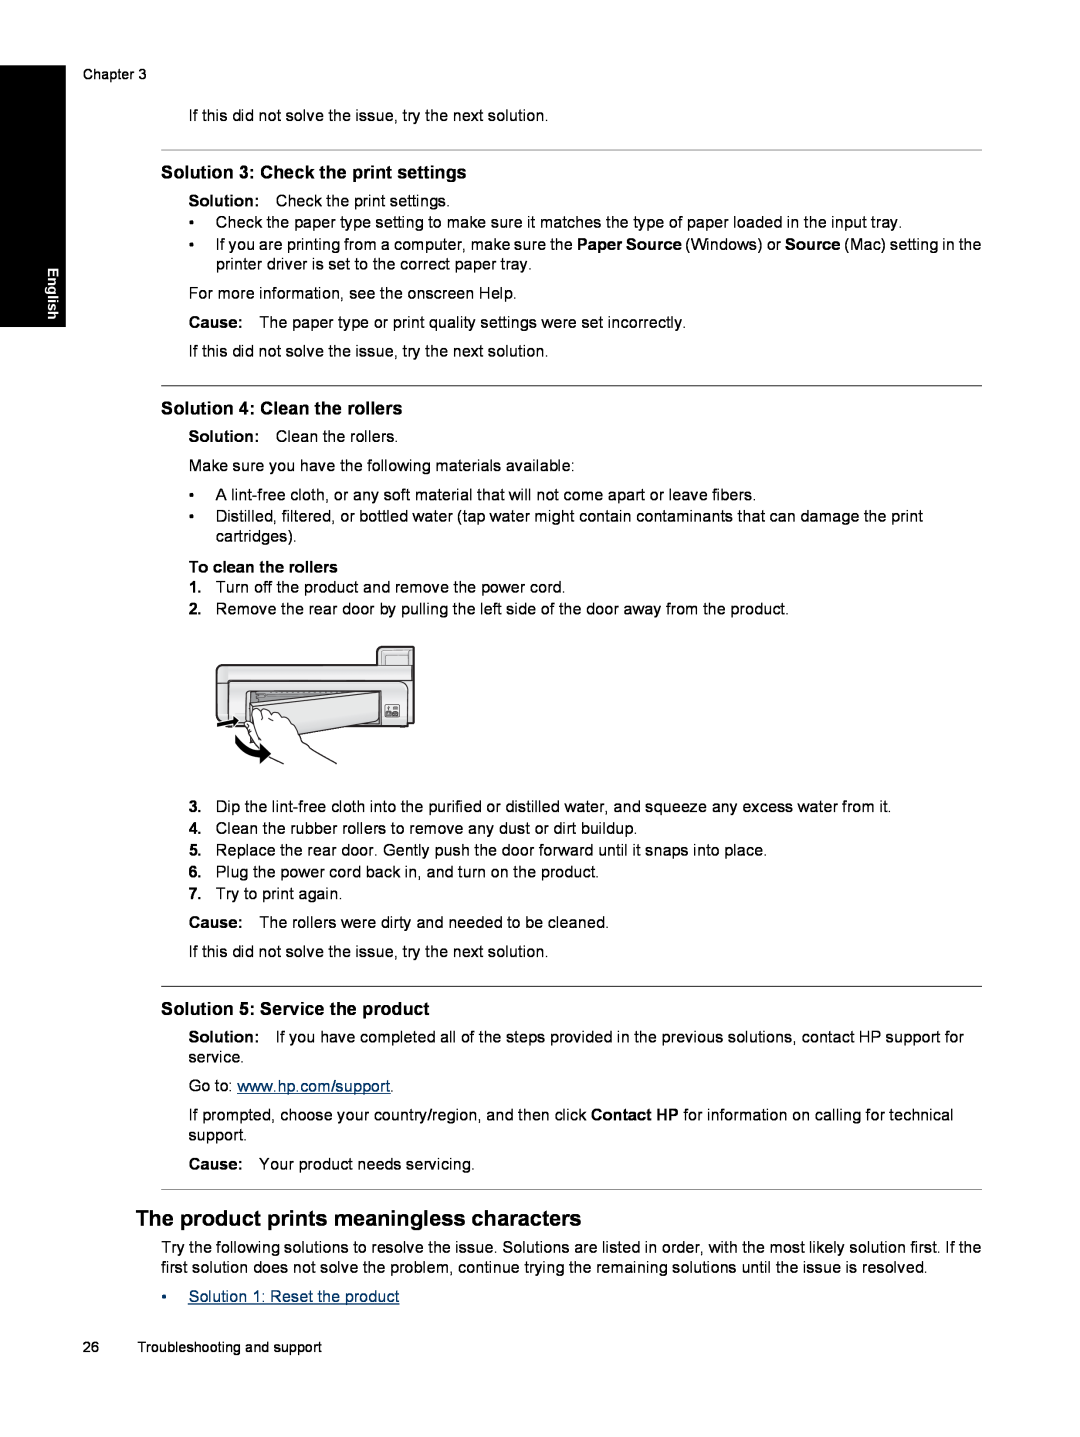 HP B8550 The product prints meaningless characters, Solution 3 Check the print settings, Solution 4 Clean the rollers 